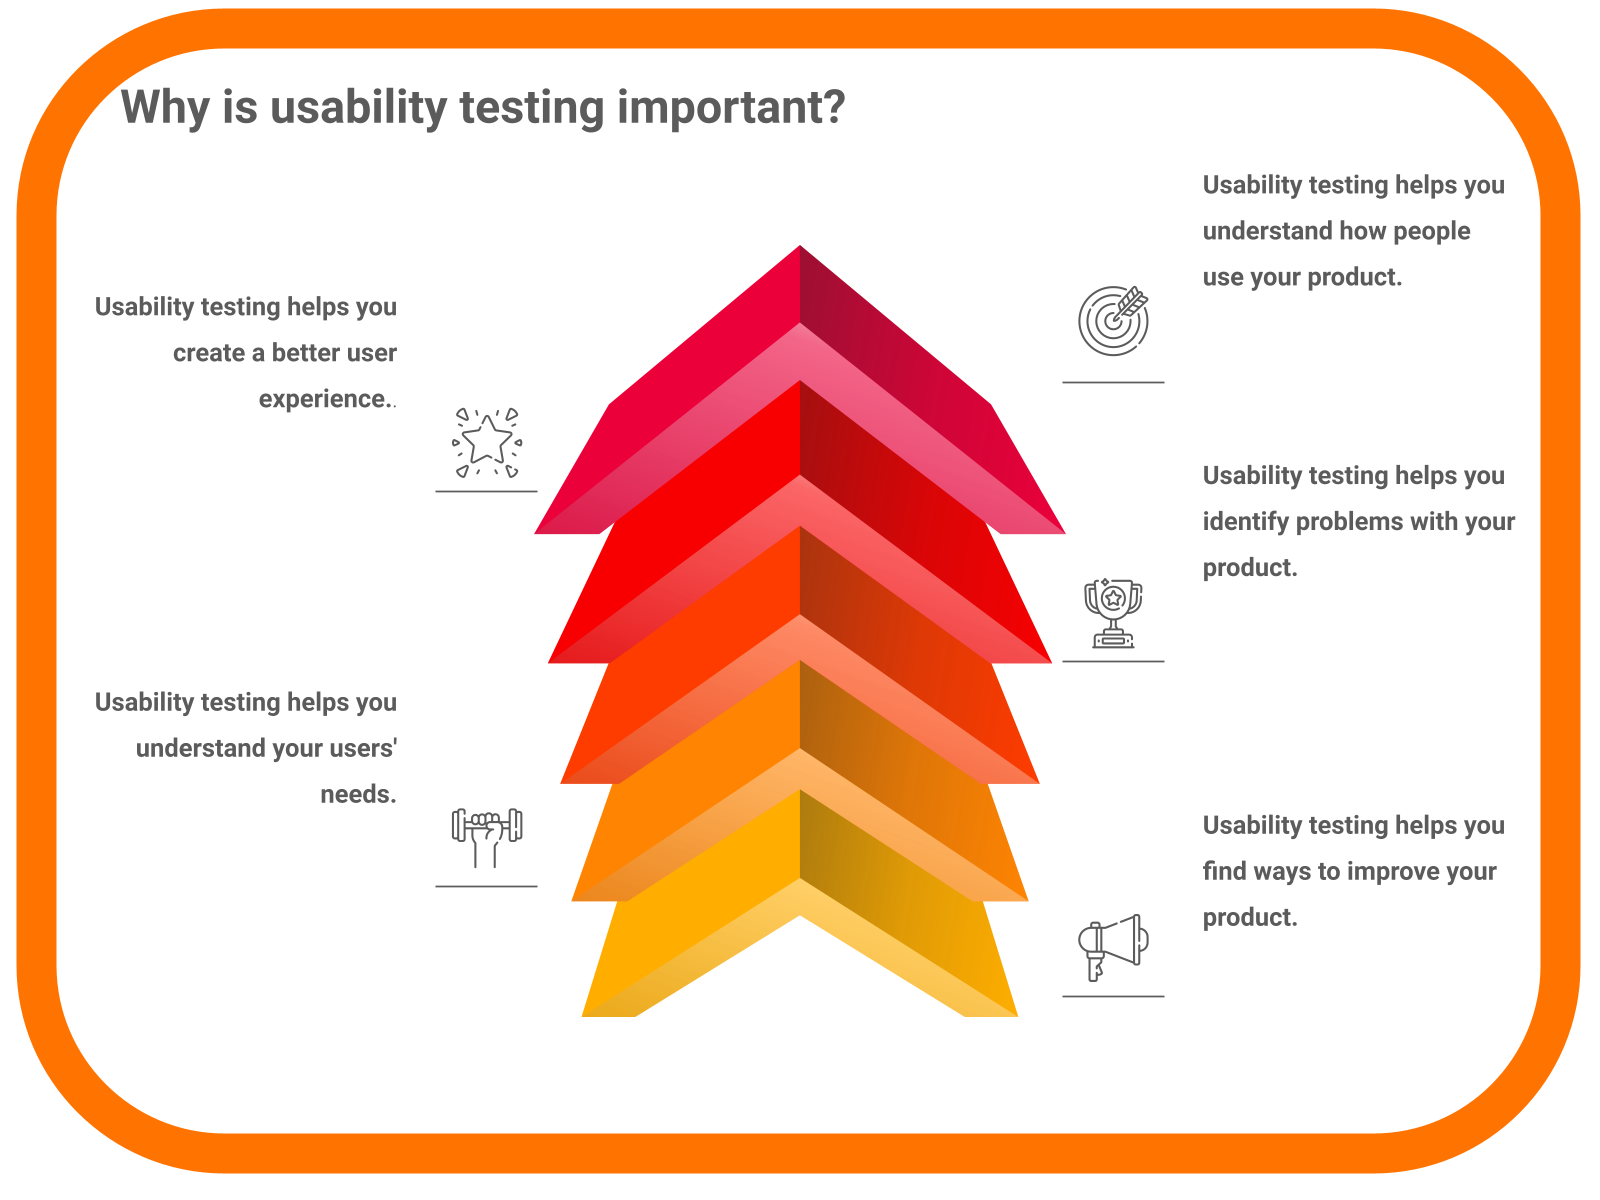 Why is usability testing important?